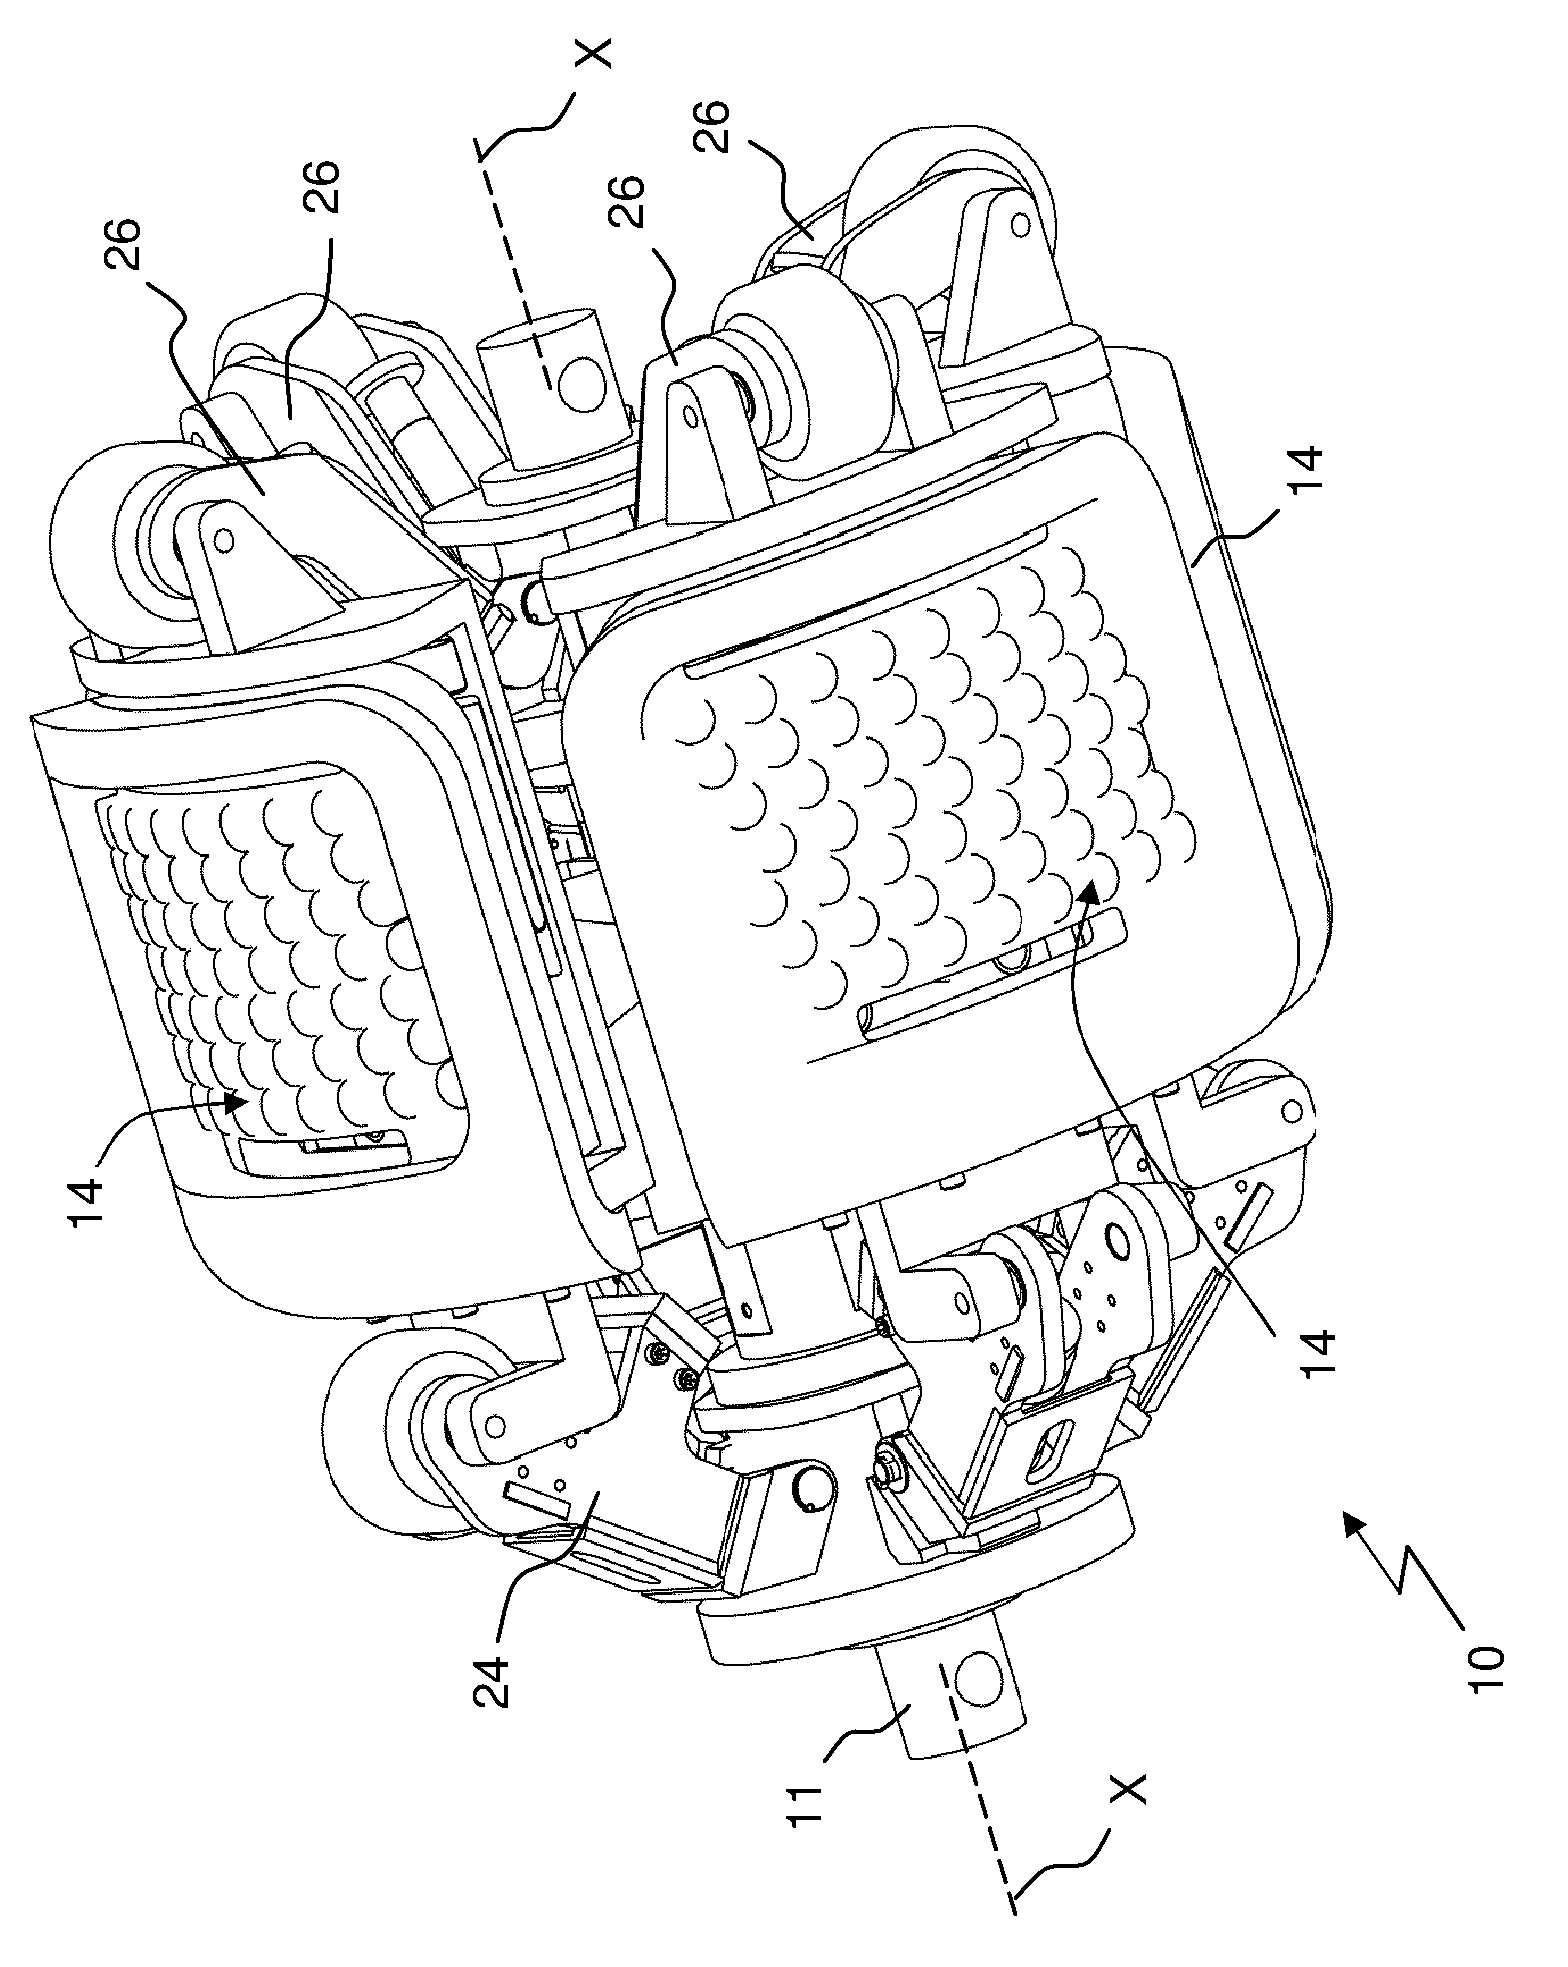 Apparatus for pipeline inspection